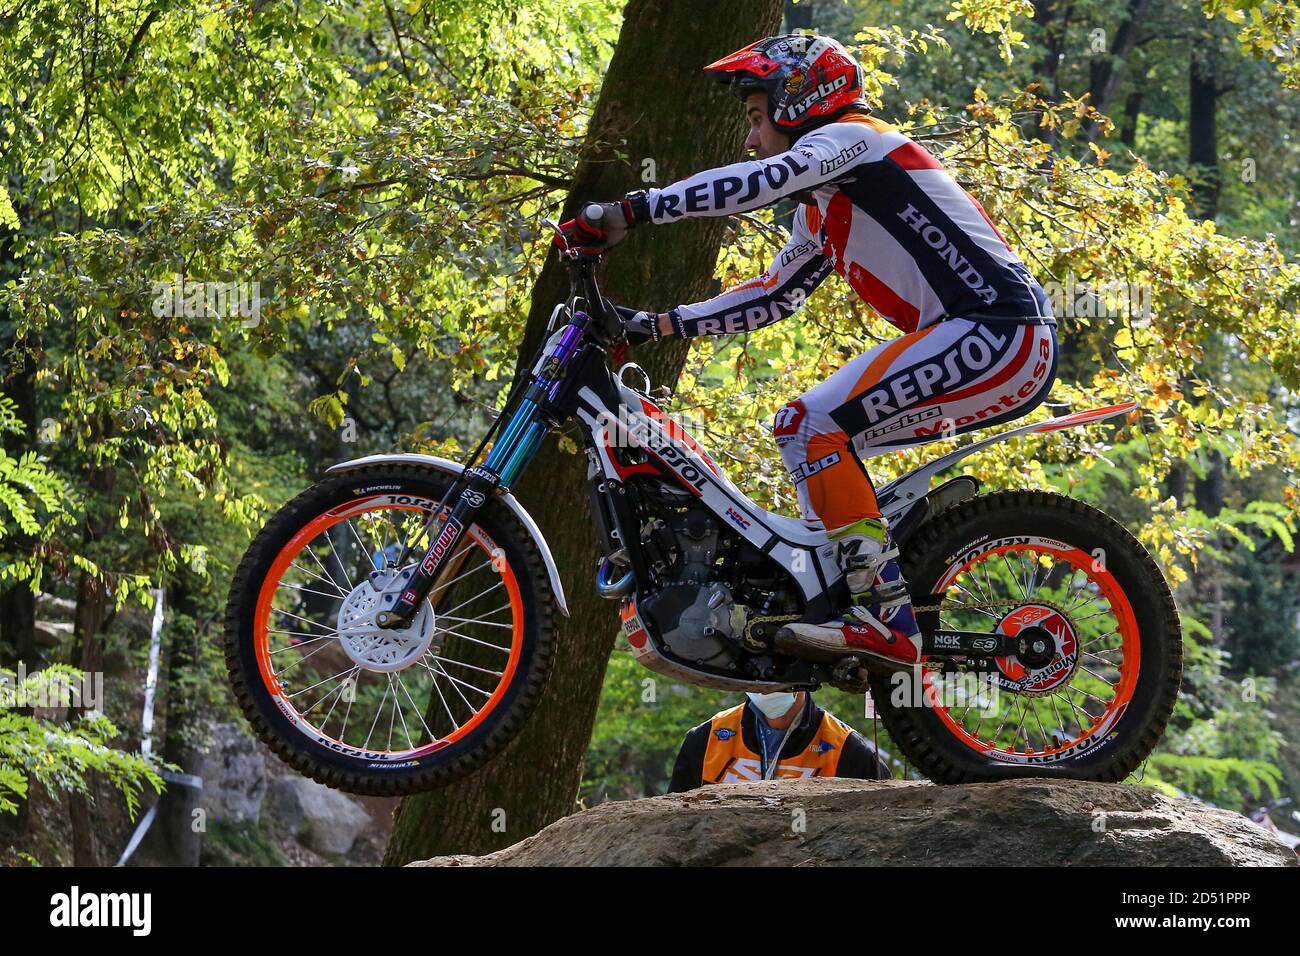 Toni Bou (Montesa / Trial GP) during the Hertz FIM Trial World Championship  (round 4) at Moto Club Lazzate circuit on October 11, 2020 in Lazzate (MB  Stock Photo - Alamy